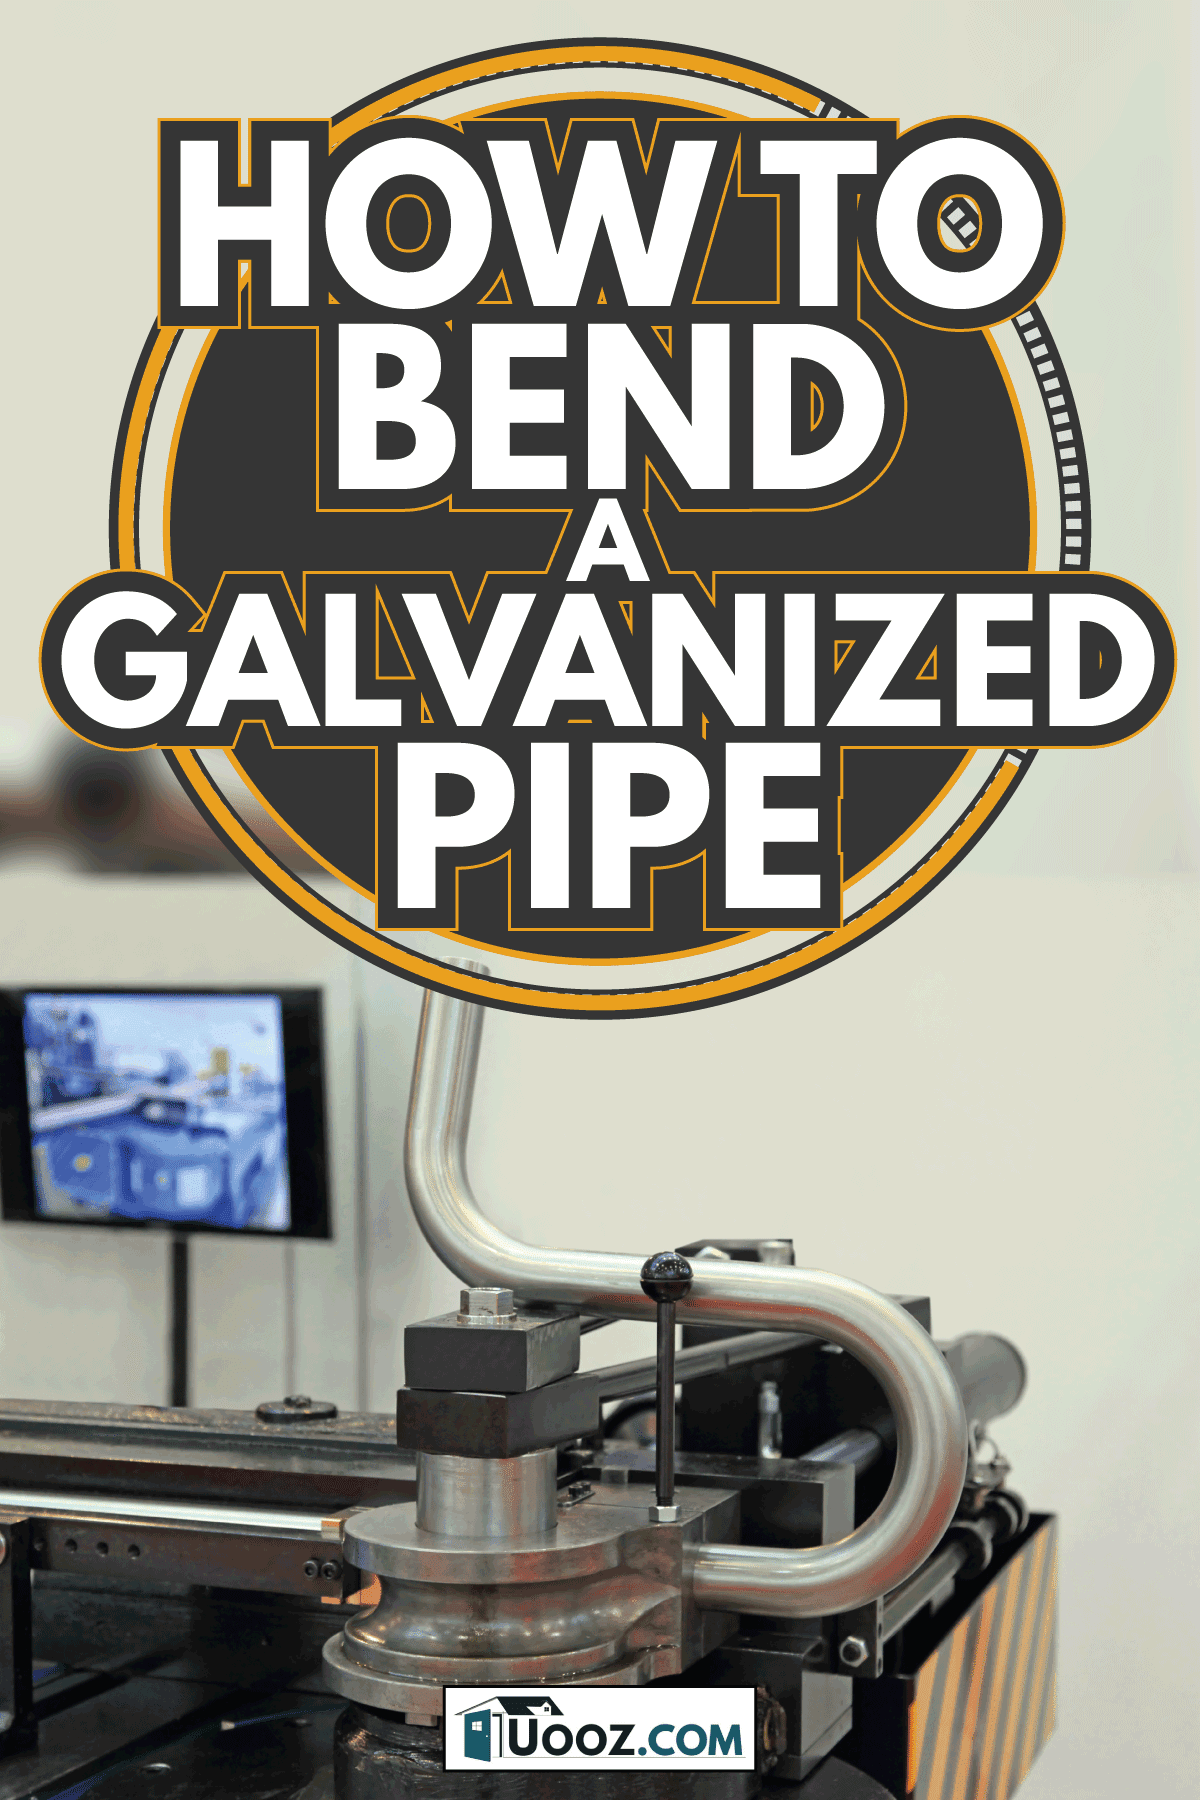 large pipe bender in action bending galvanized iron. How To Bend A Galvanized Pipe